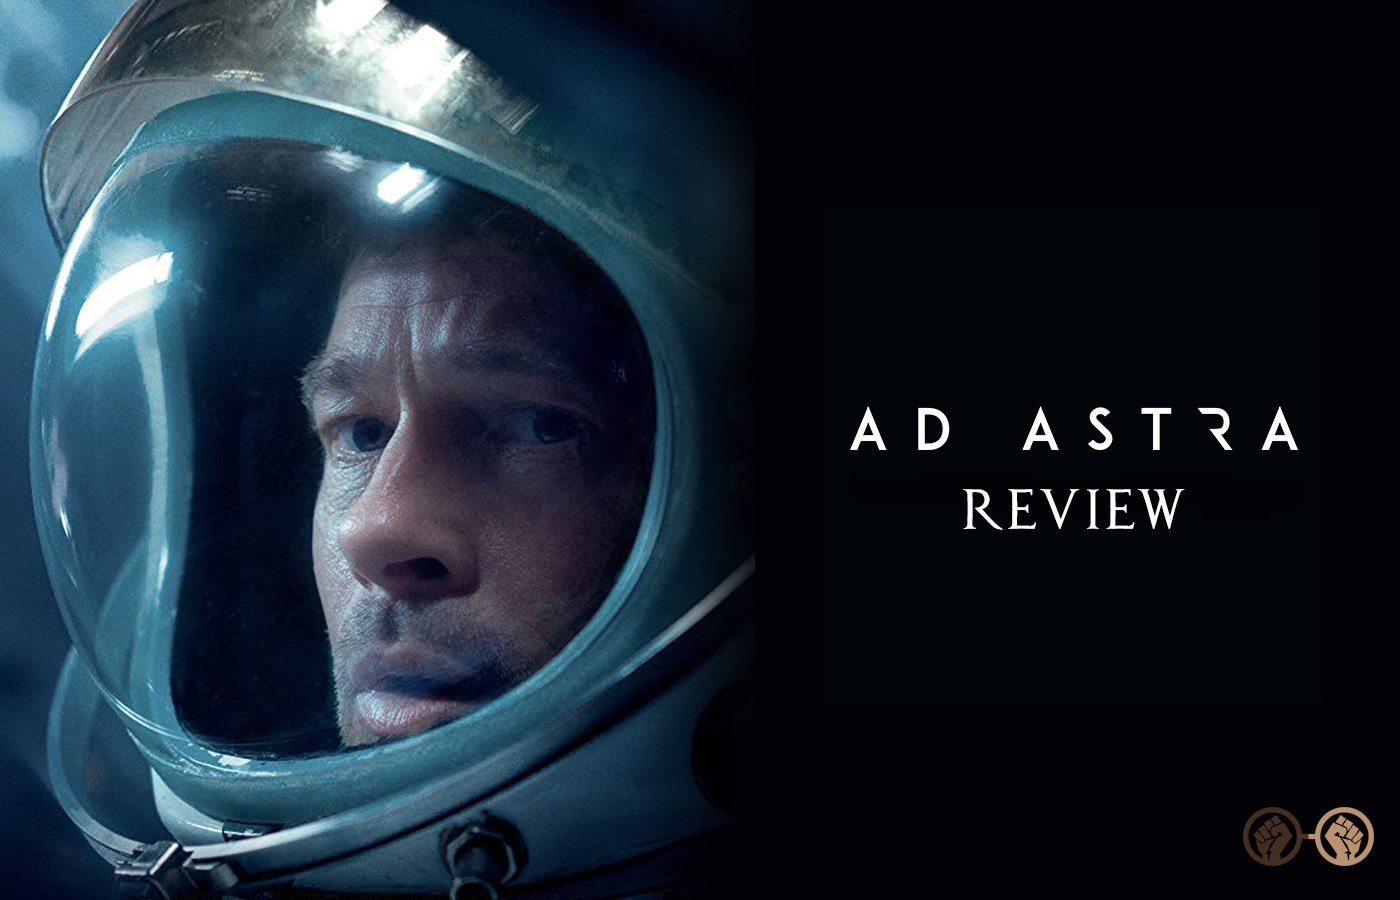 Visually Brilliant ‘Ad Astra’ Attempts A Different Take On the Space Genre – Review